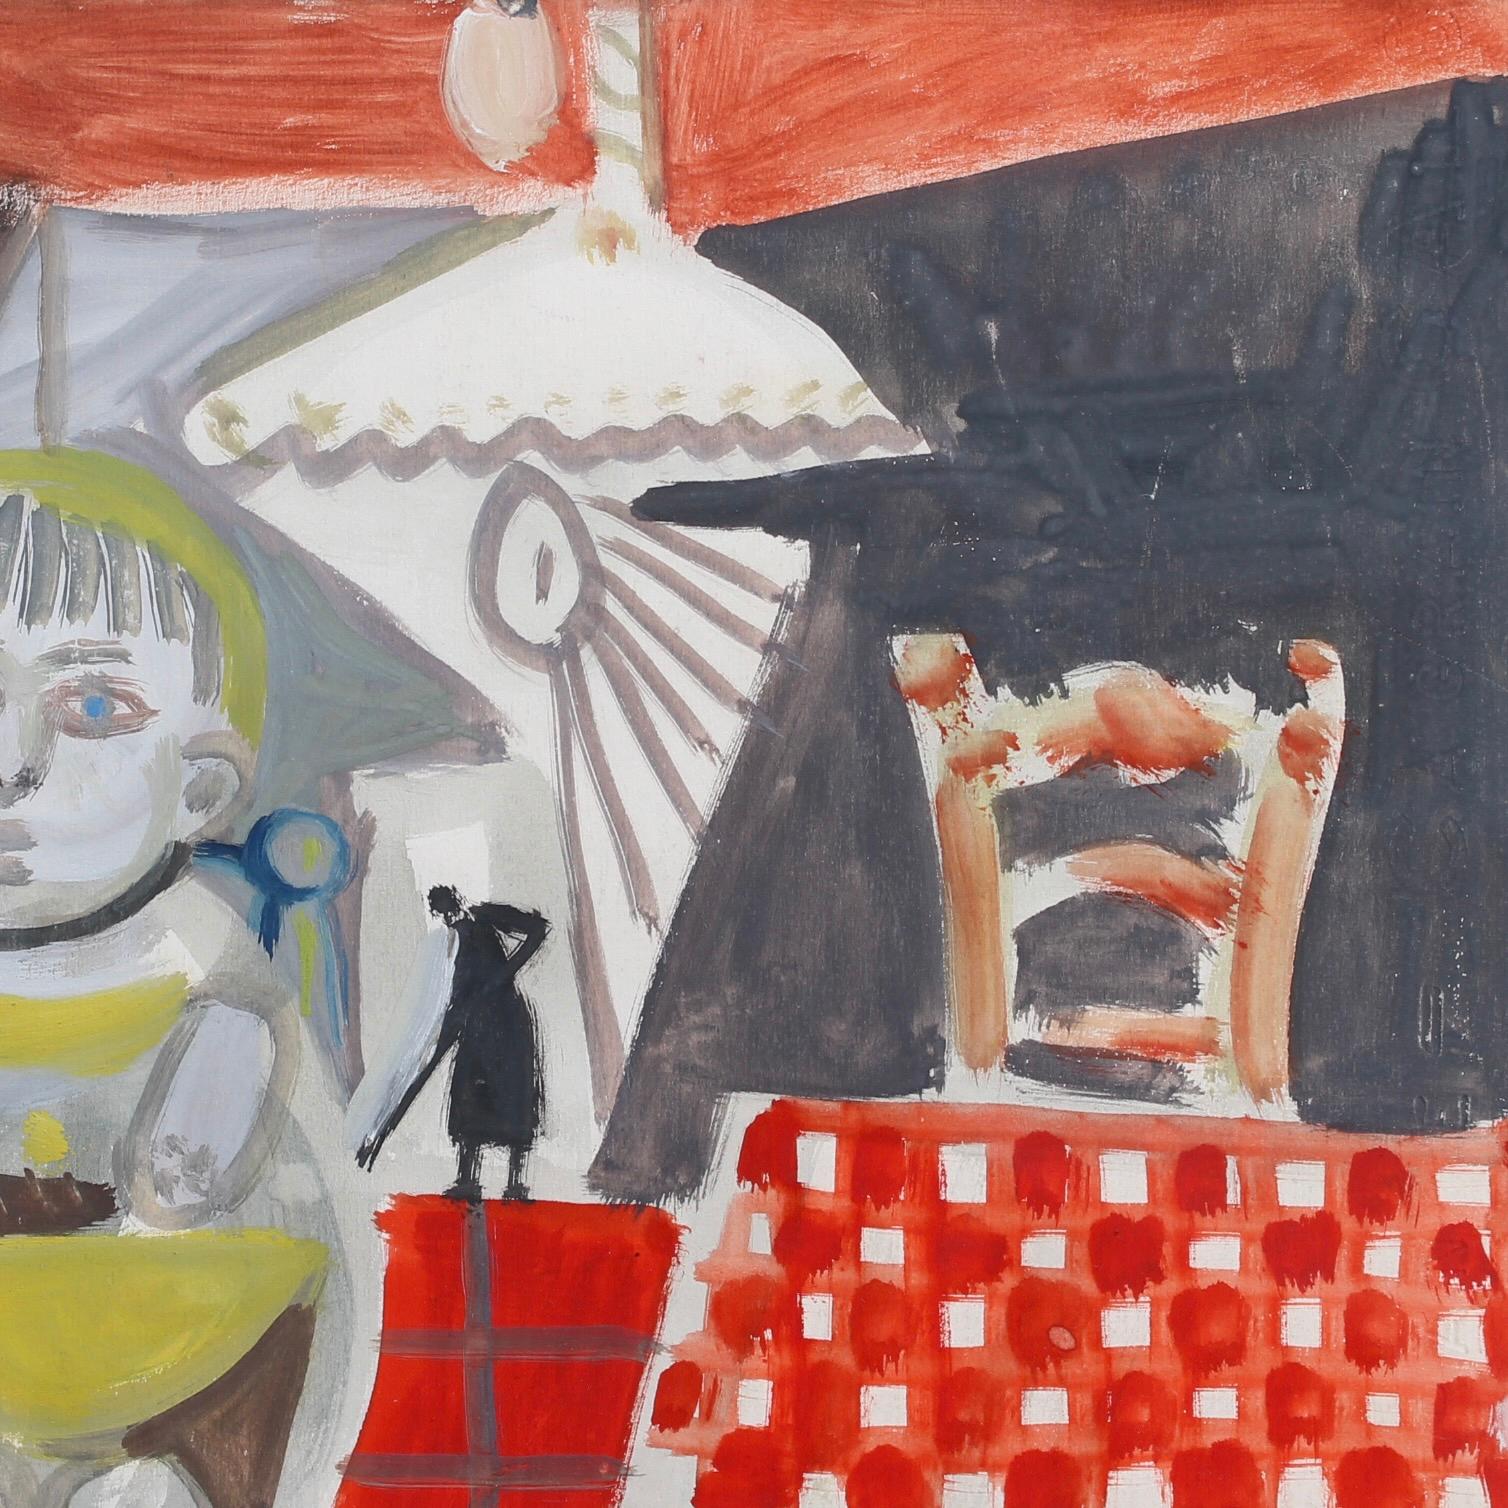 'Portrait of a Child at Home', gouache on fine paper, by Raymond Dèbieve (1984). A charming scene of a toddler in his high chair and family dog under the table painted in Debiève's post-cubist style. Mum is seen doing housework in the background.